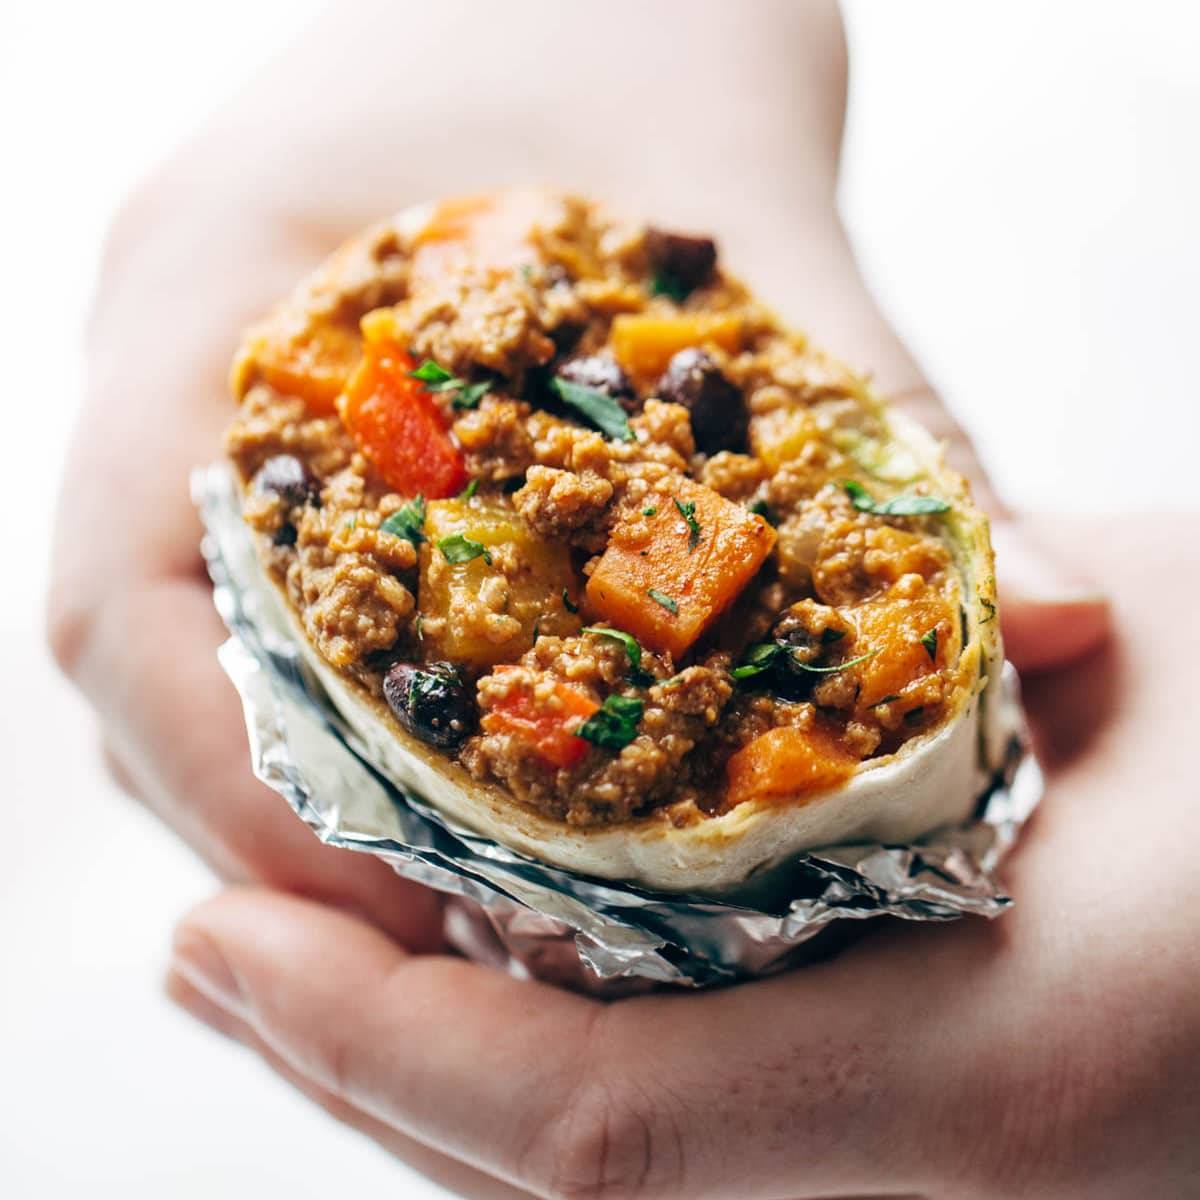 Chipotle Turkey Burrito held by hands.